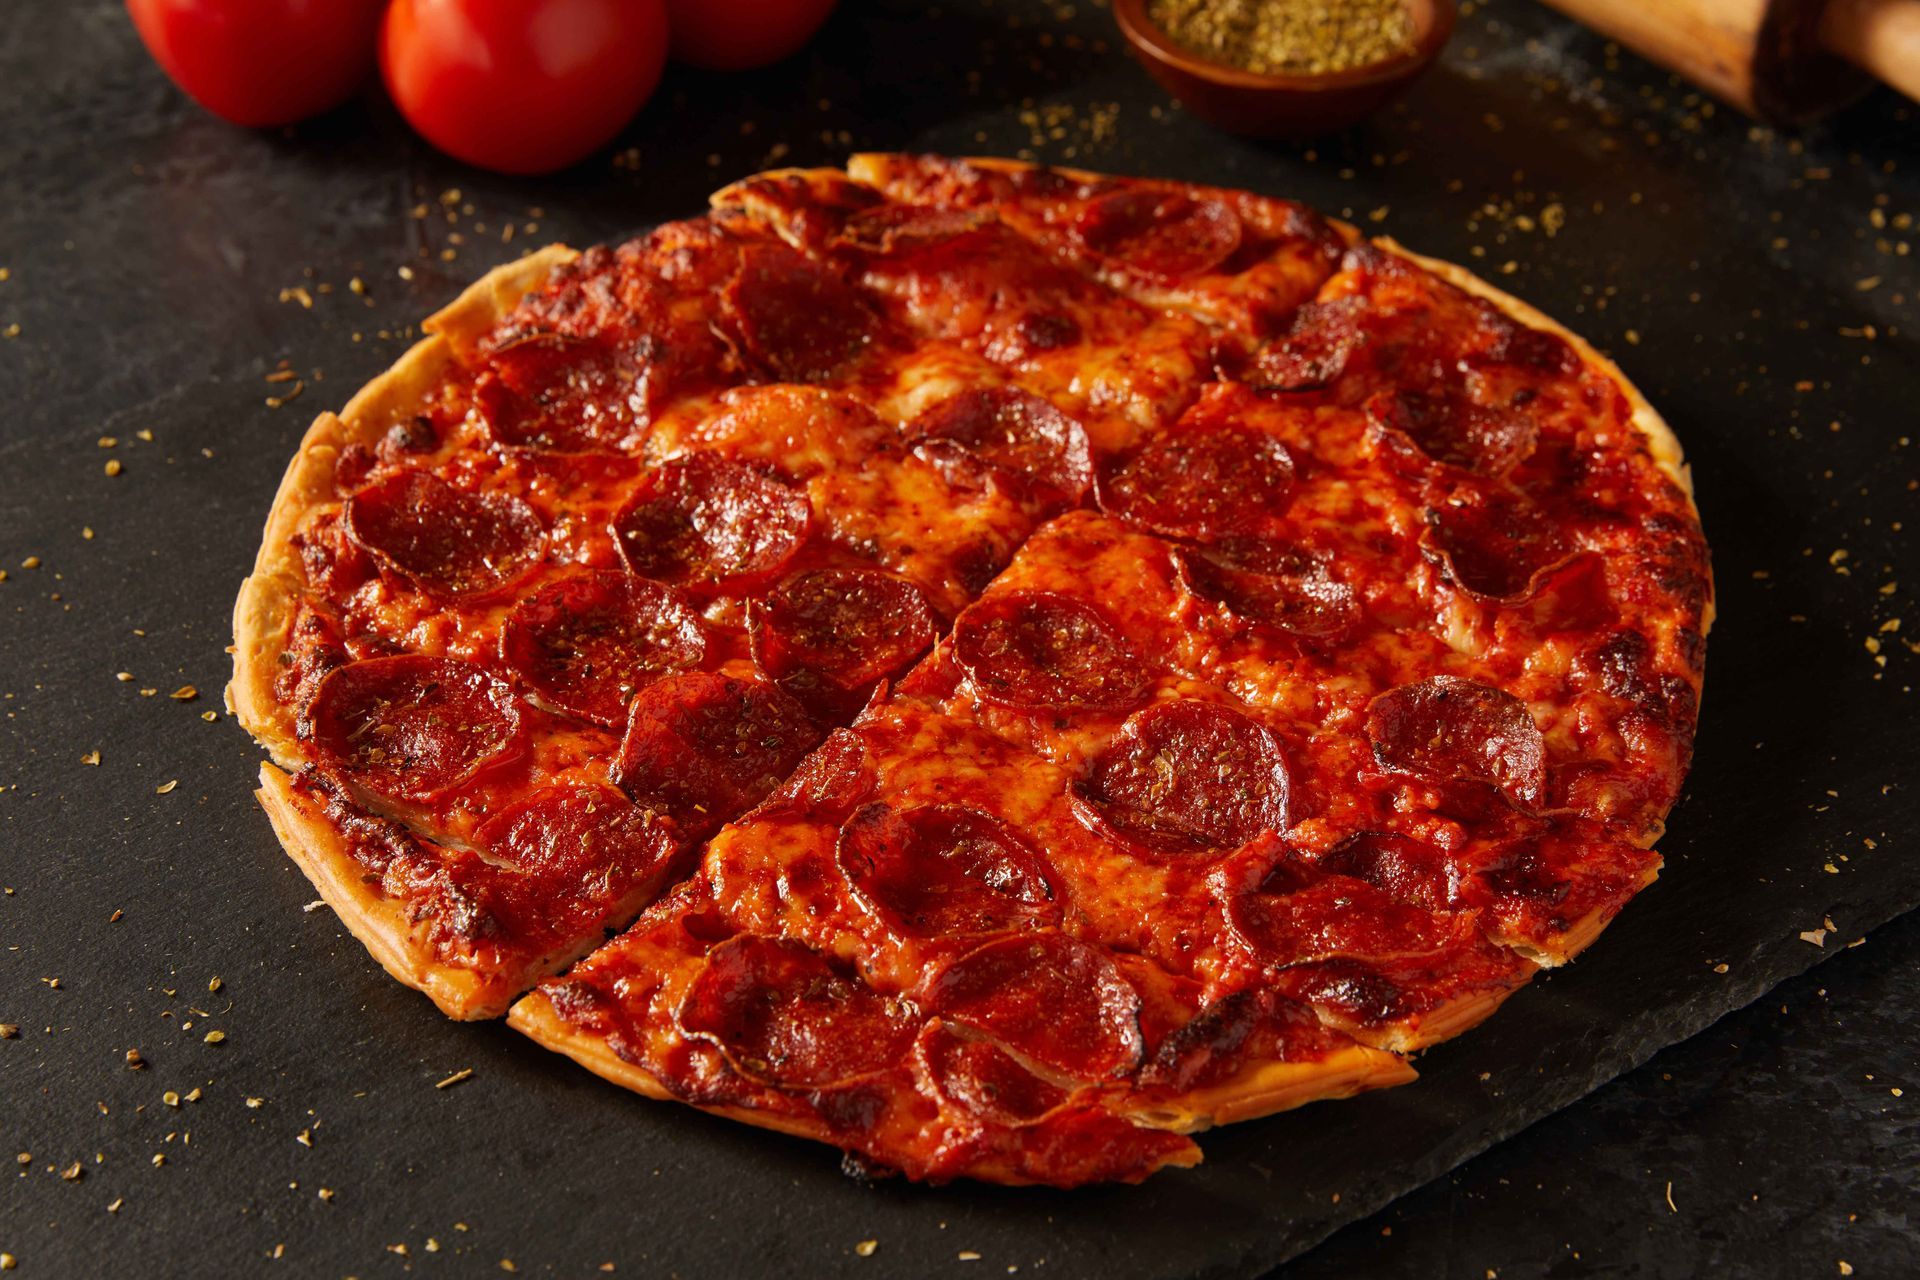 A pepperoni pizza is sitting on a table with tomatoes in the background.